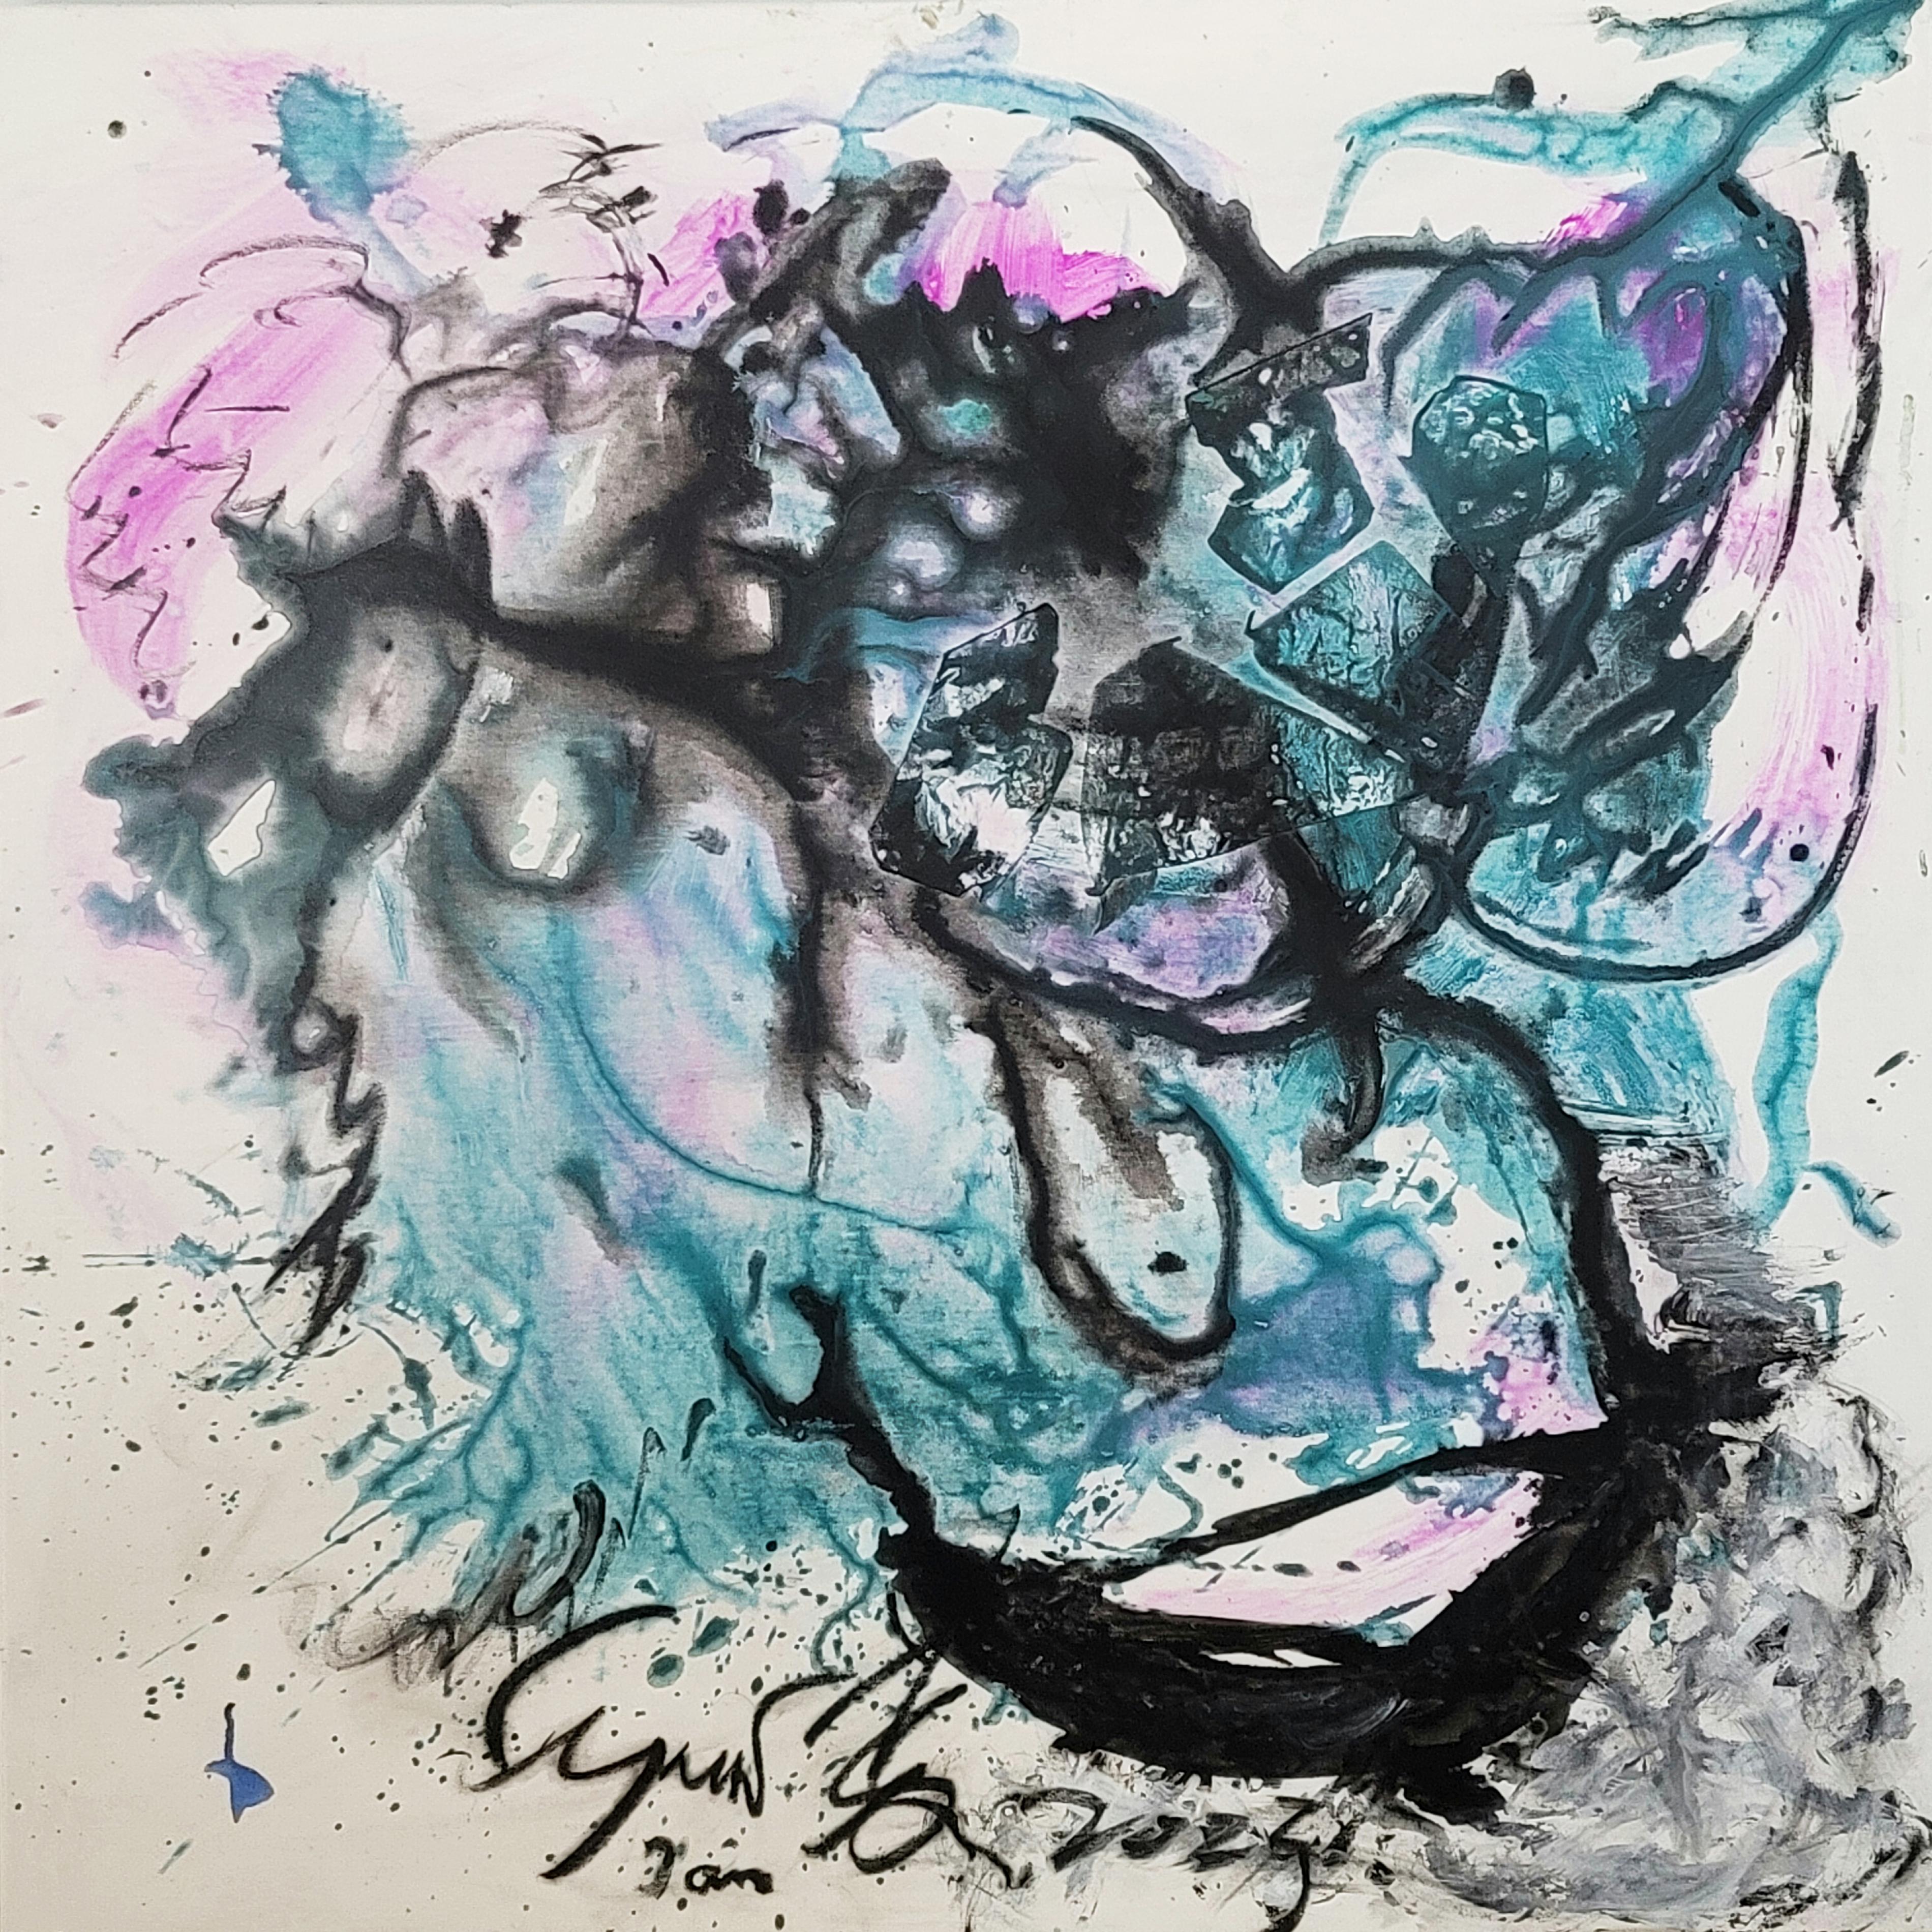 A Singular Transformation I - Energetic, Expressive Abstract, Zen Calligraphy - Painting by Cymn Wong 